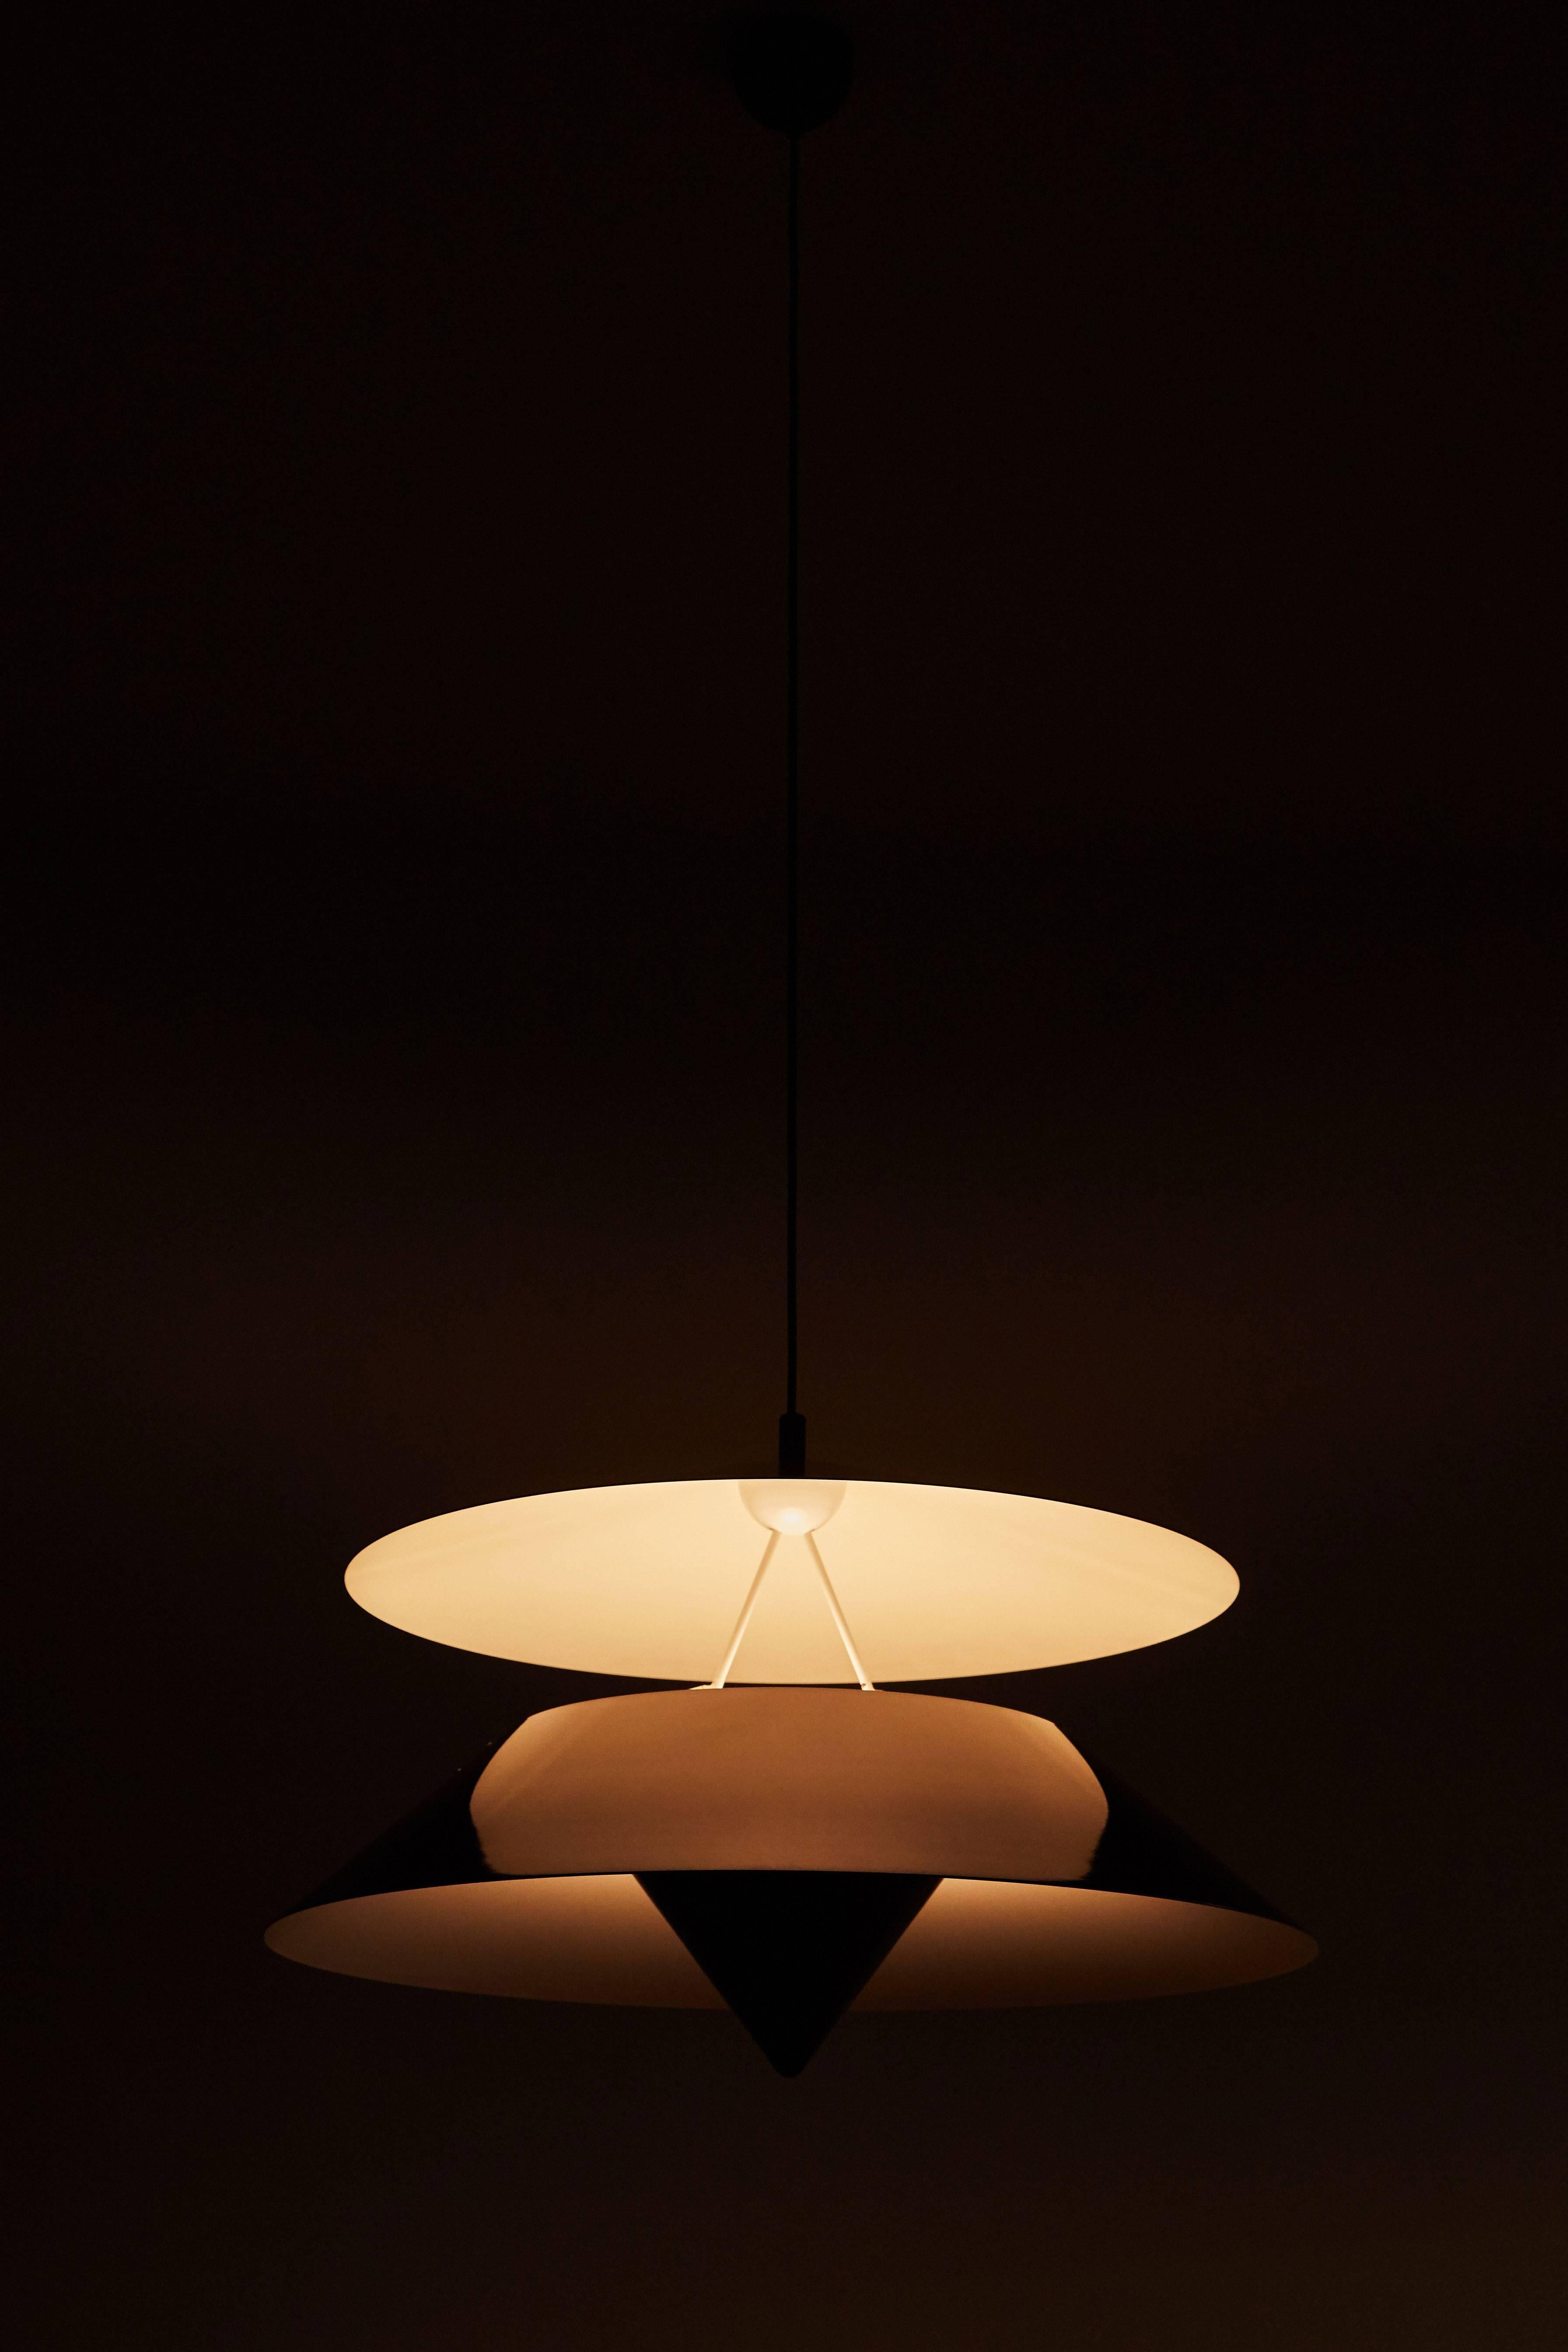 Akaari pendant by Vico Magistretti designed in Italy for Oluce, 1985. Painted aluminum and metal. Provides uplight and downlight. Original canopy. Wired for US junction boxes. Takes two E27 75w maximum bulbs.